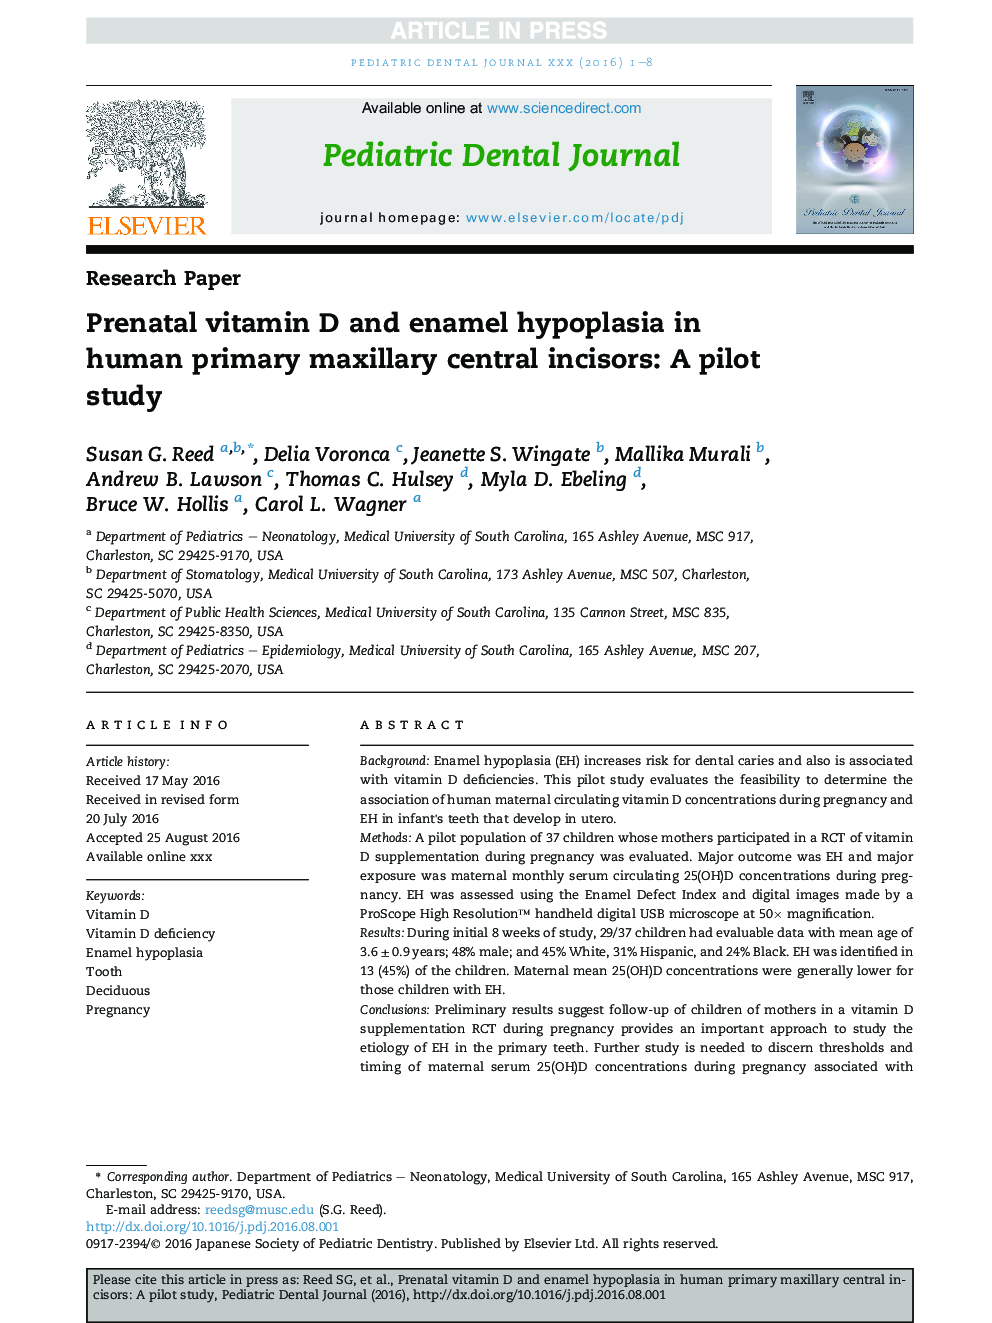 Prenatal vitamin D and enamel hypoplasia in human primary maxillary central incisors: A pilot study